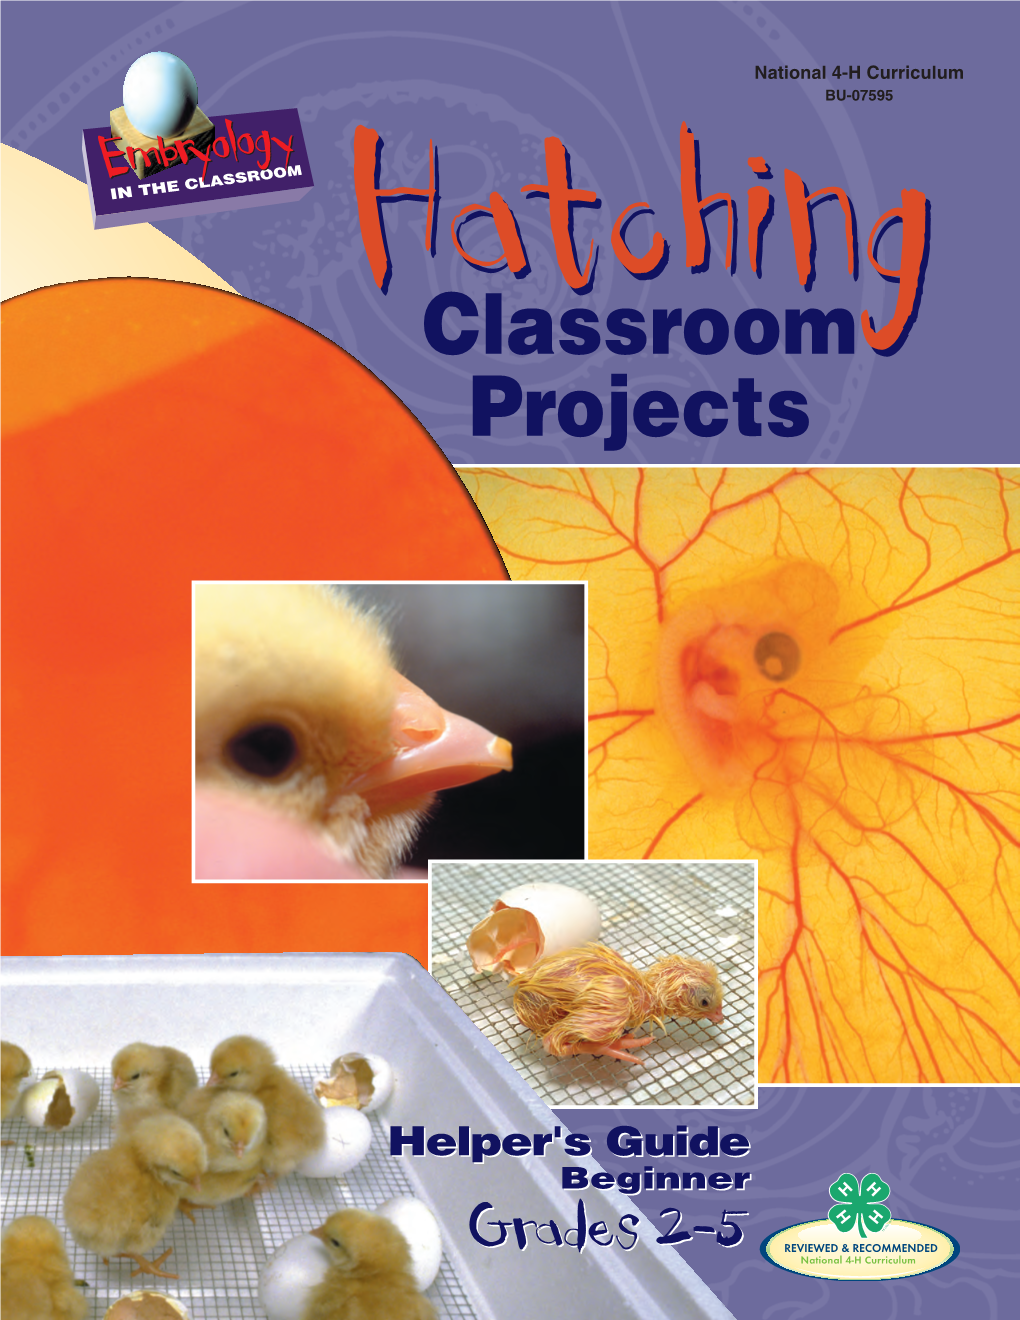 Classroom Projects Designed to Provide You with Background Information and Exciting Experiential Activities Dealing with Life Science for Use in Your Classroom